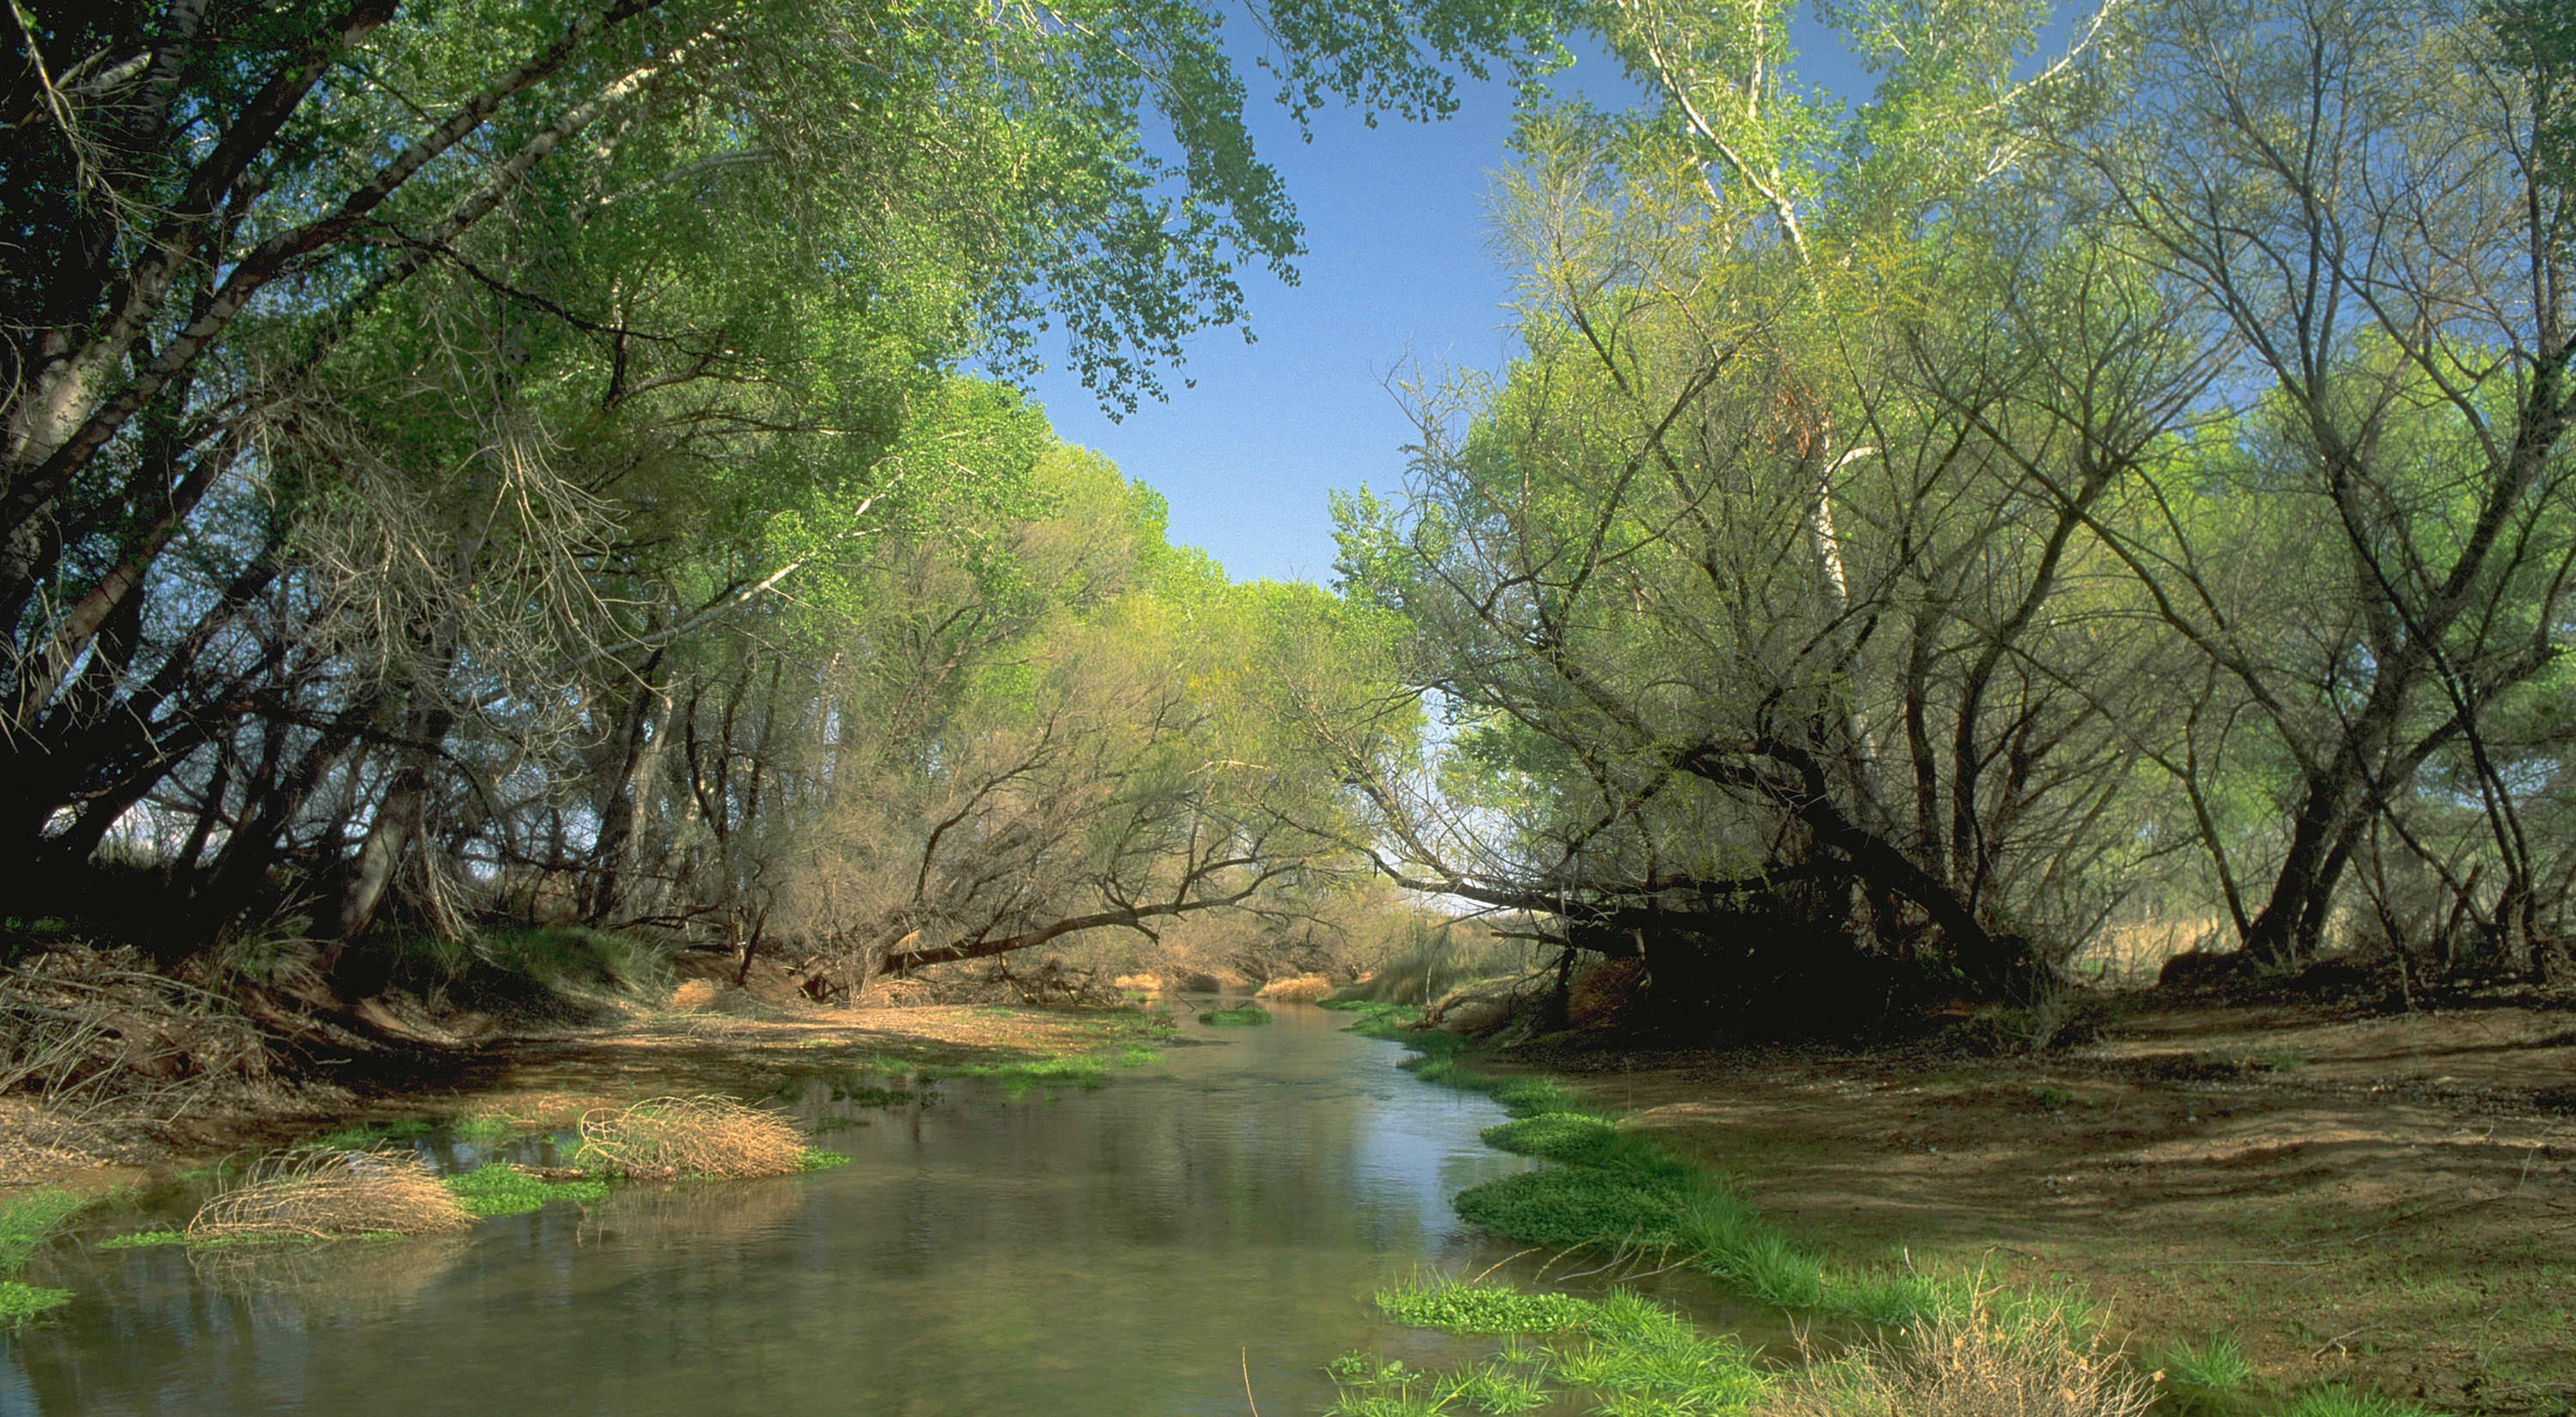 Water-level view of San Pedro River with trees arching overhead.